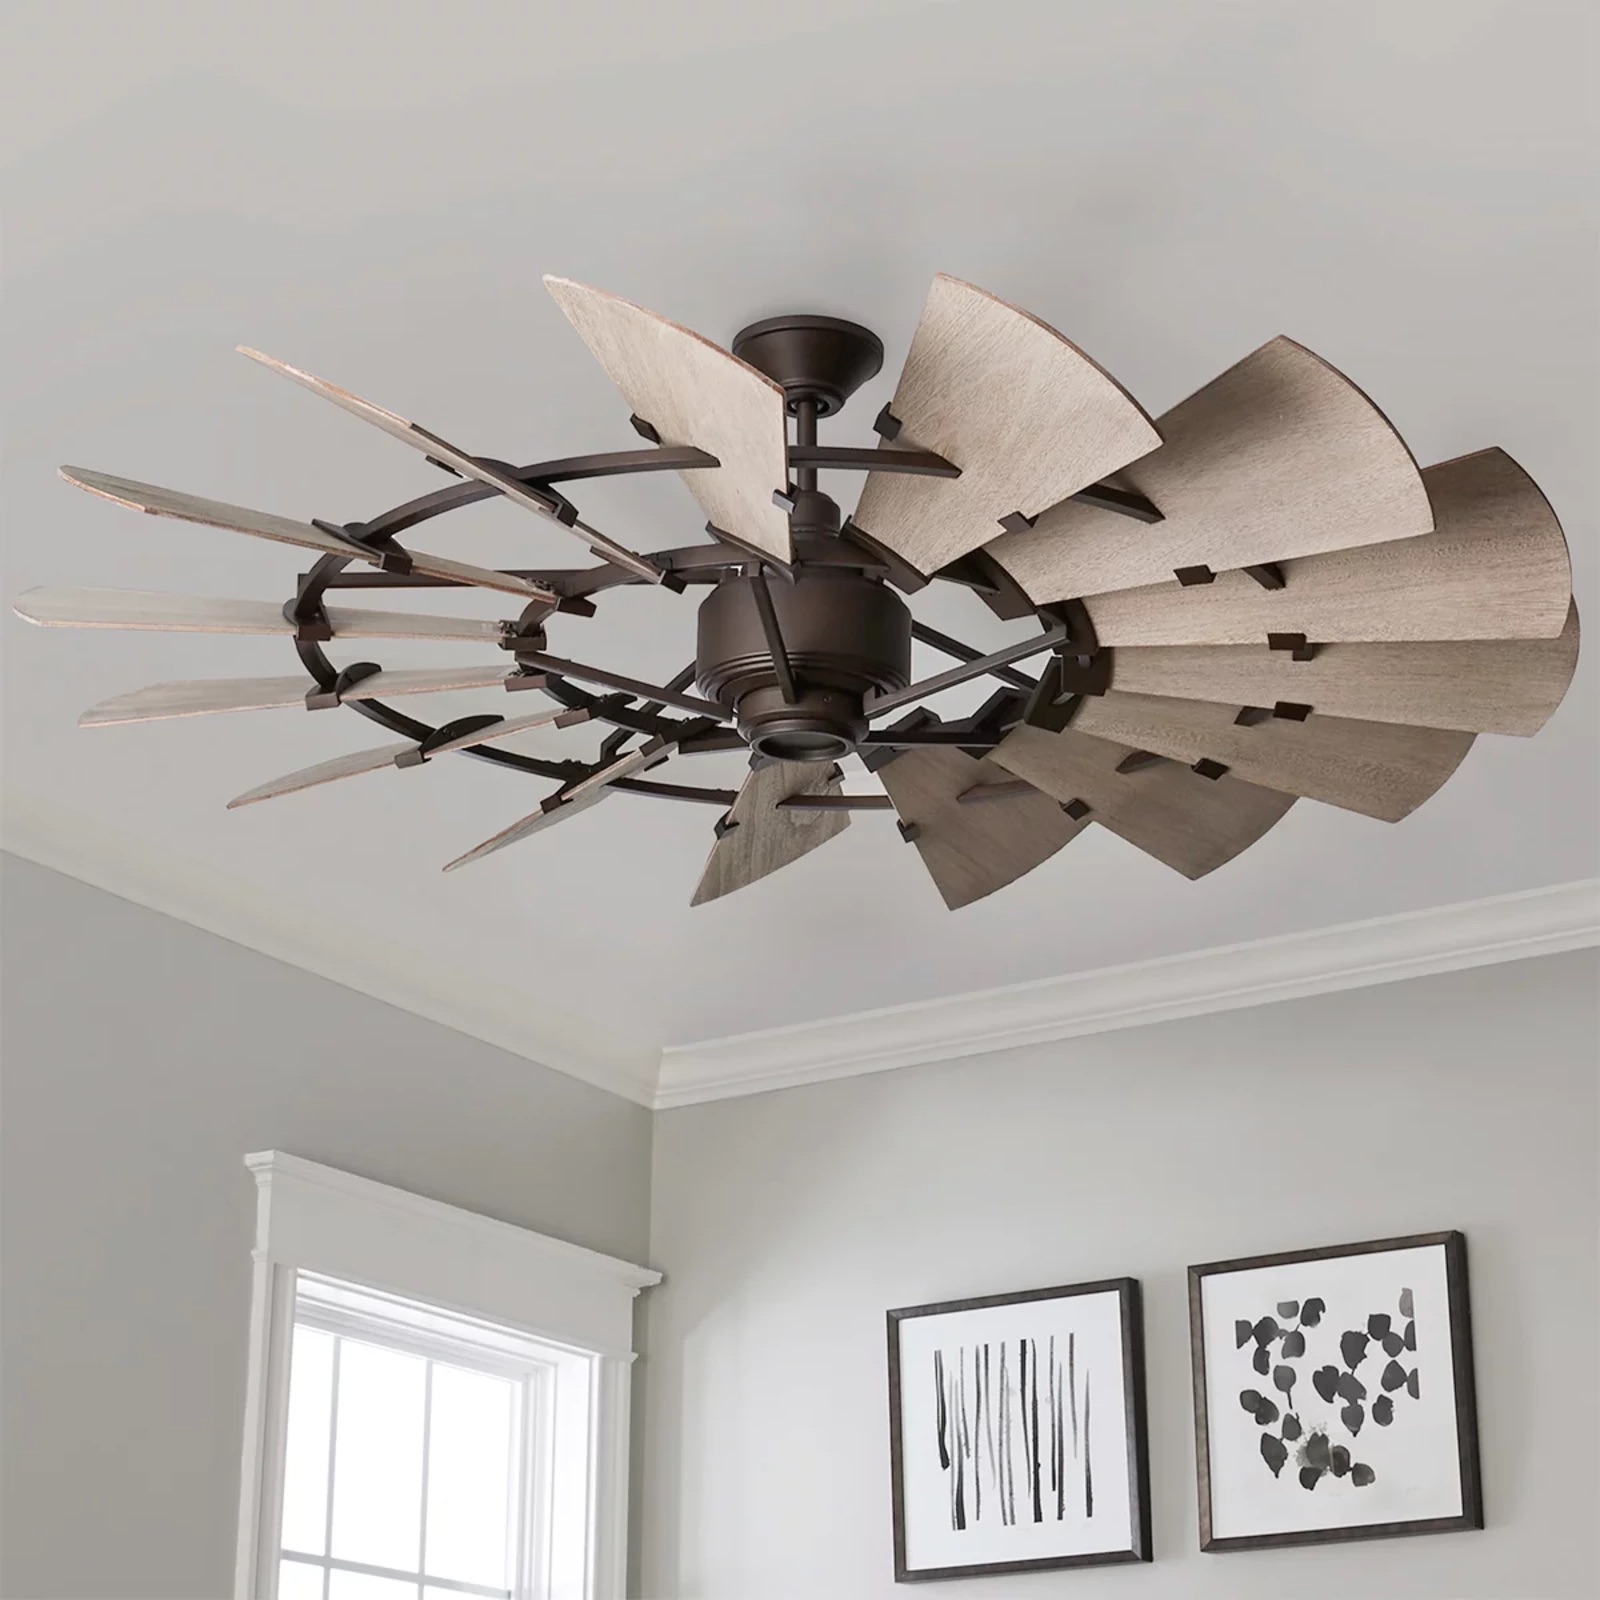 How Much Does It Cost To Install Ceiling Fans